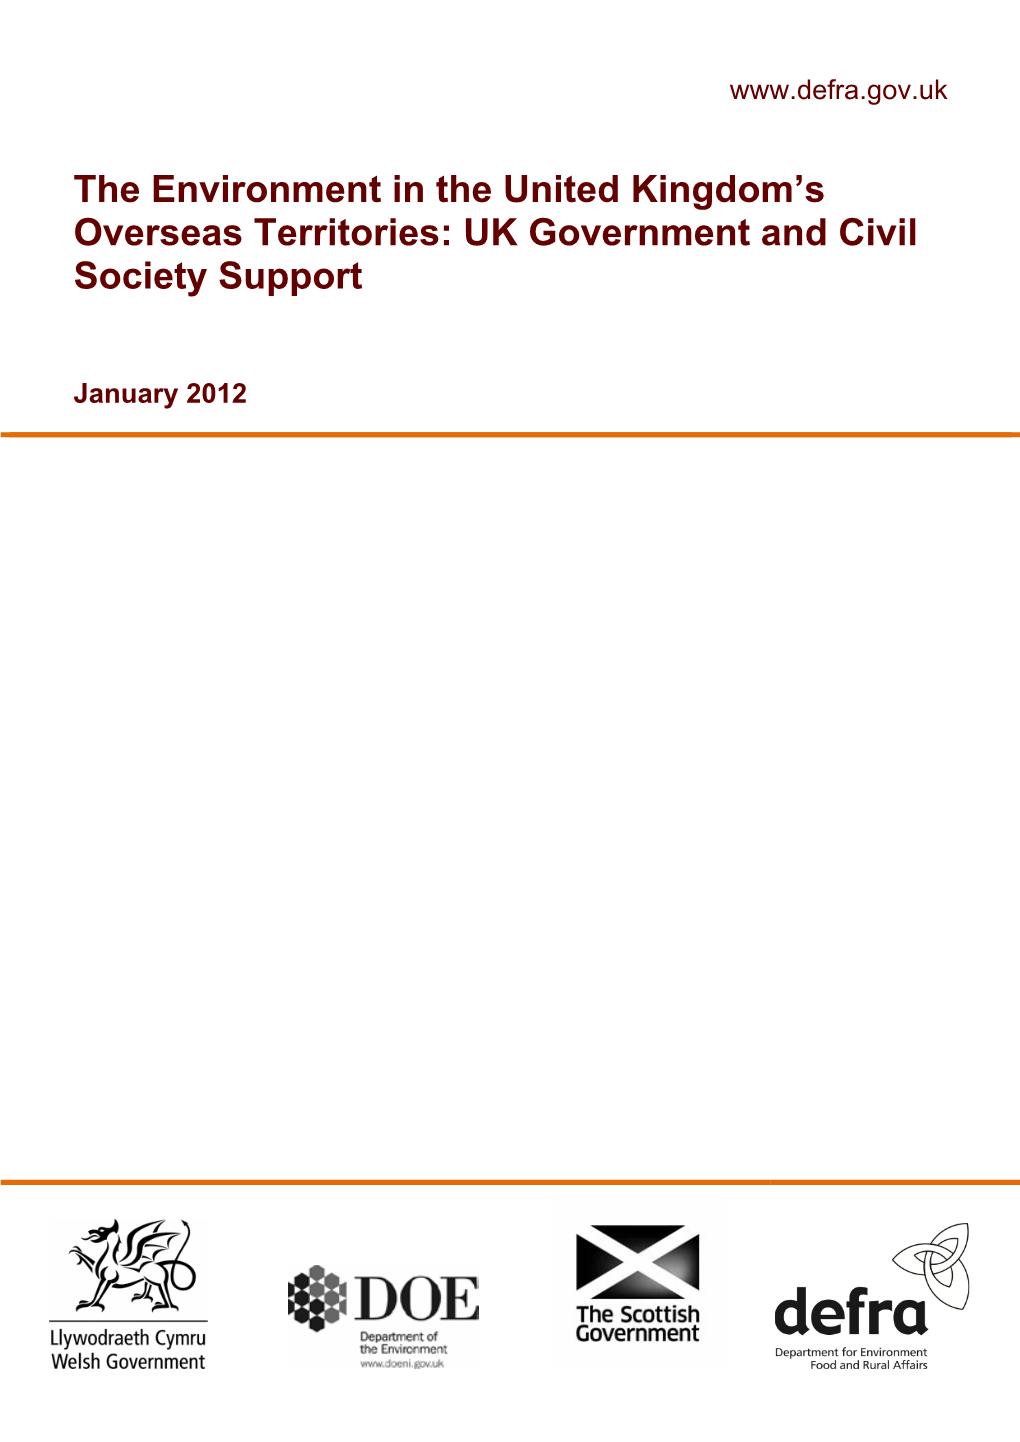 The Environment in the United Kingdom's Overseas Territories: UK